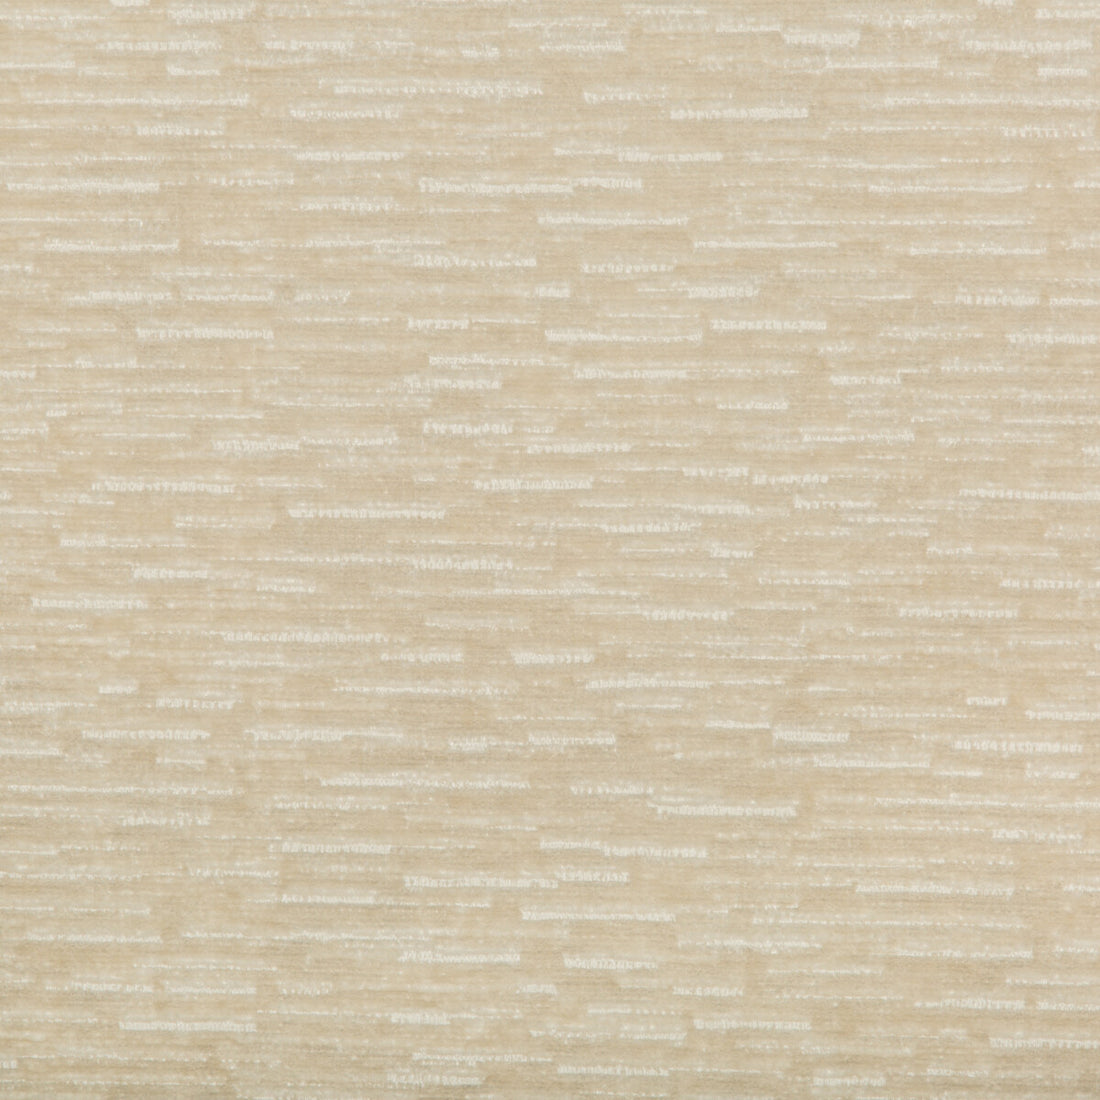 Kravet Smart fabric in 34731-1 color - pattern 34731.1.0 - by Kravet Smart in the Performance collection